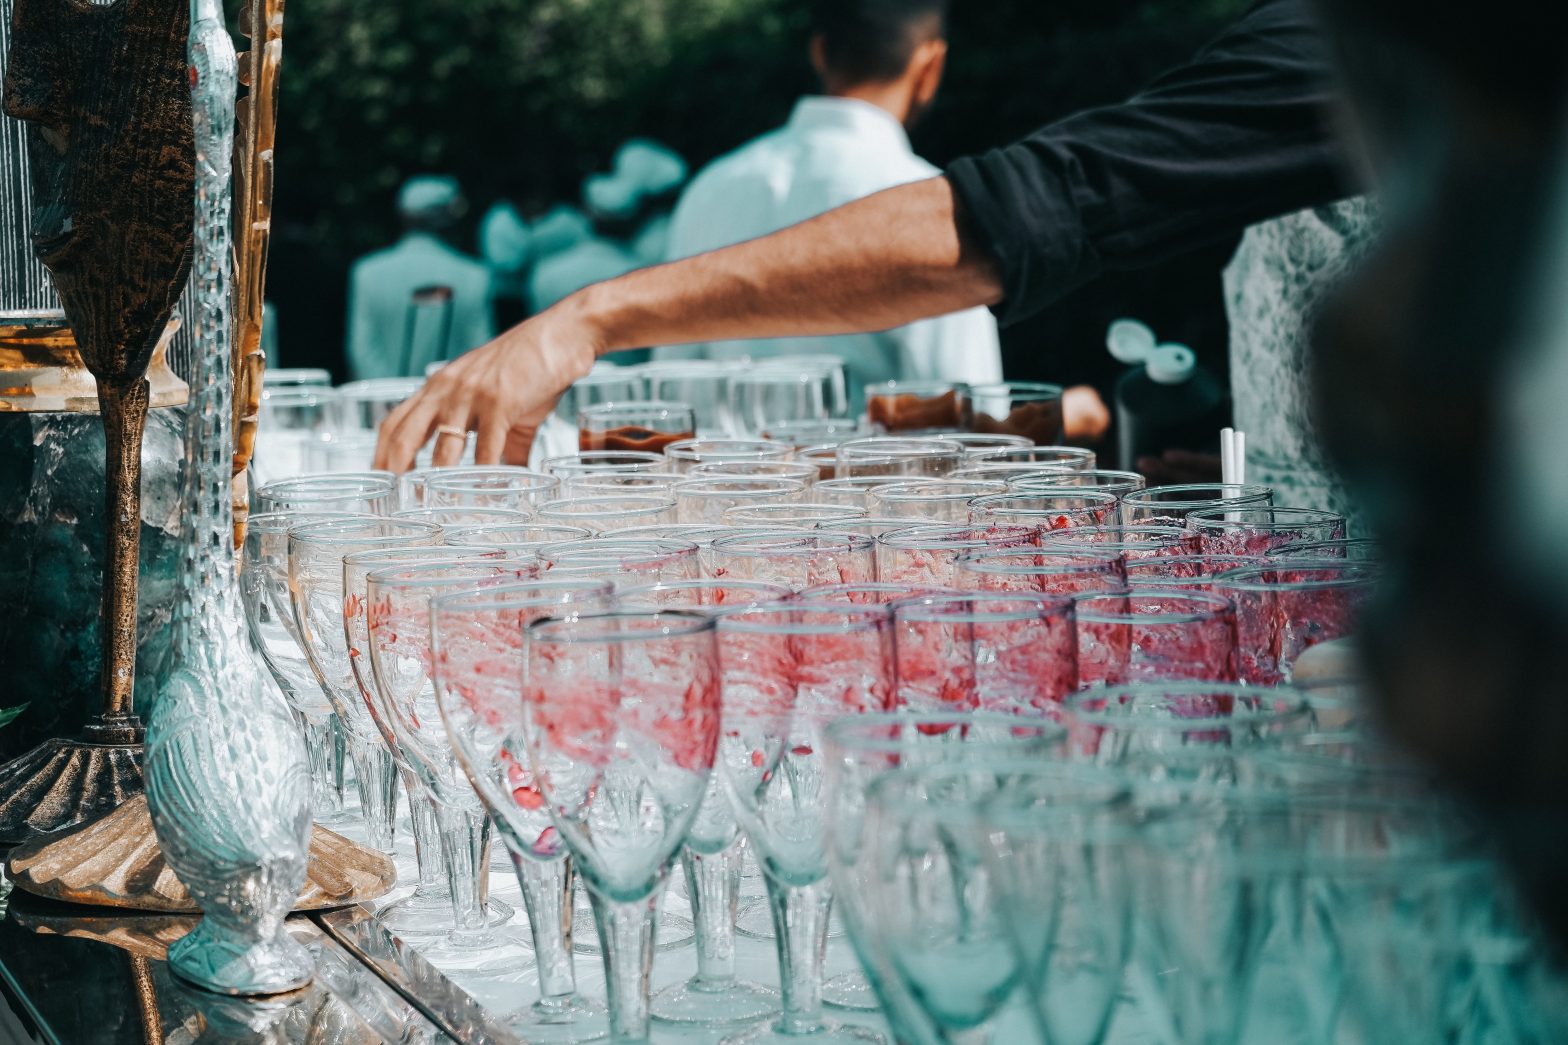 The Essential Bartender Rules for a Successful Private Event